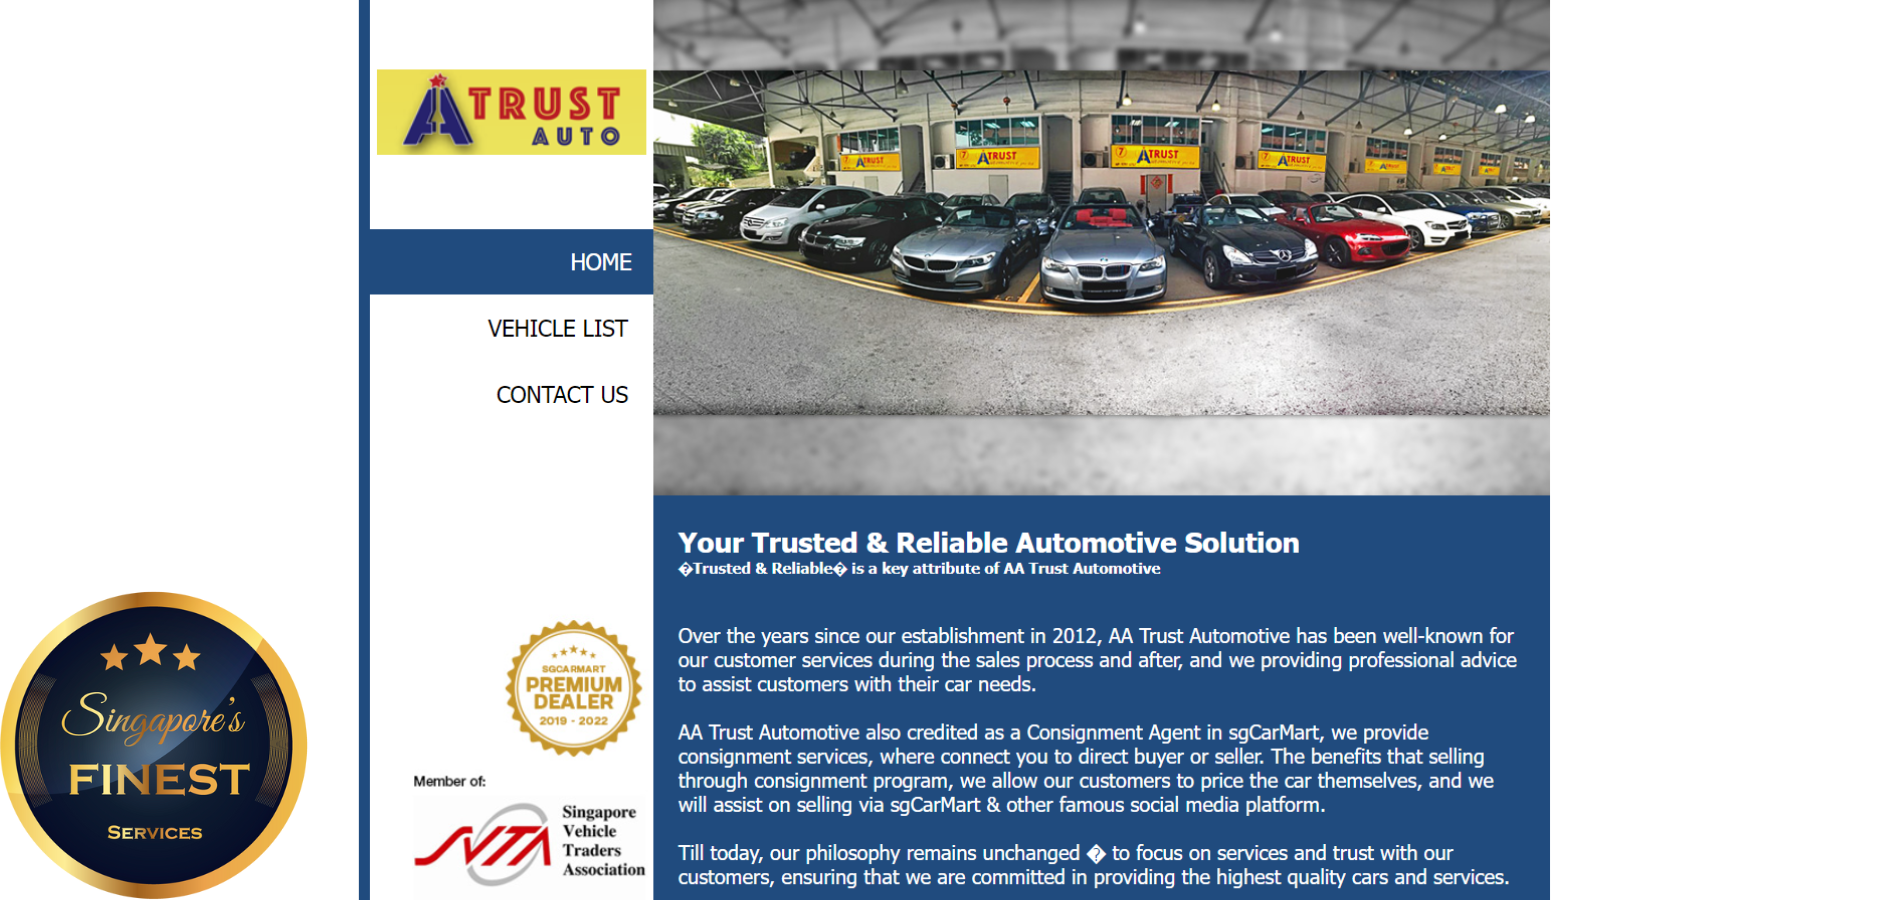 The Finest Used Car Dealers in Singapore